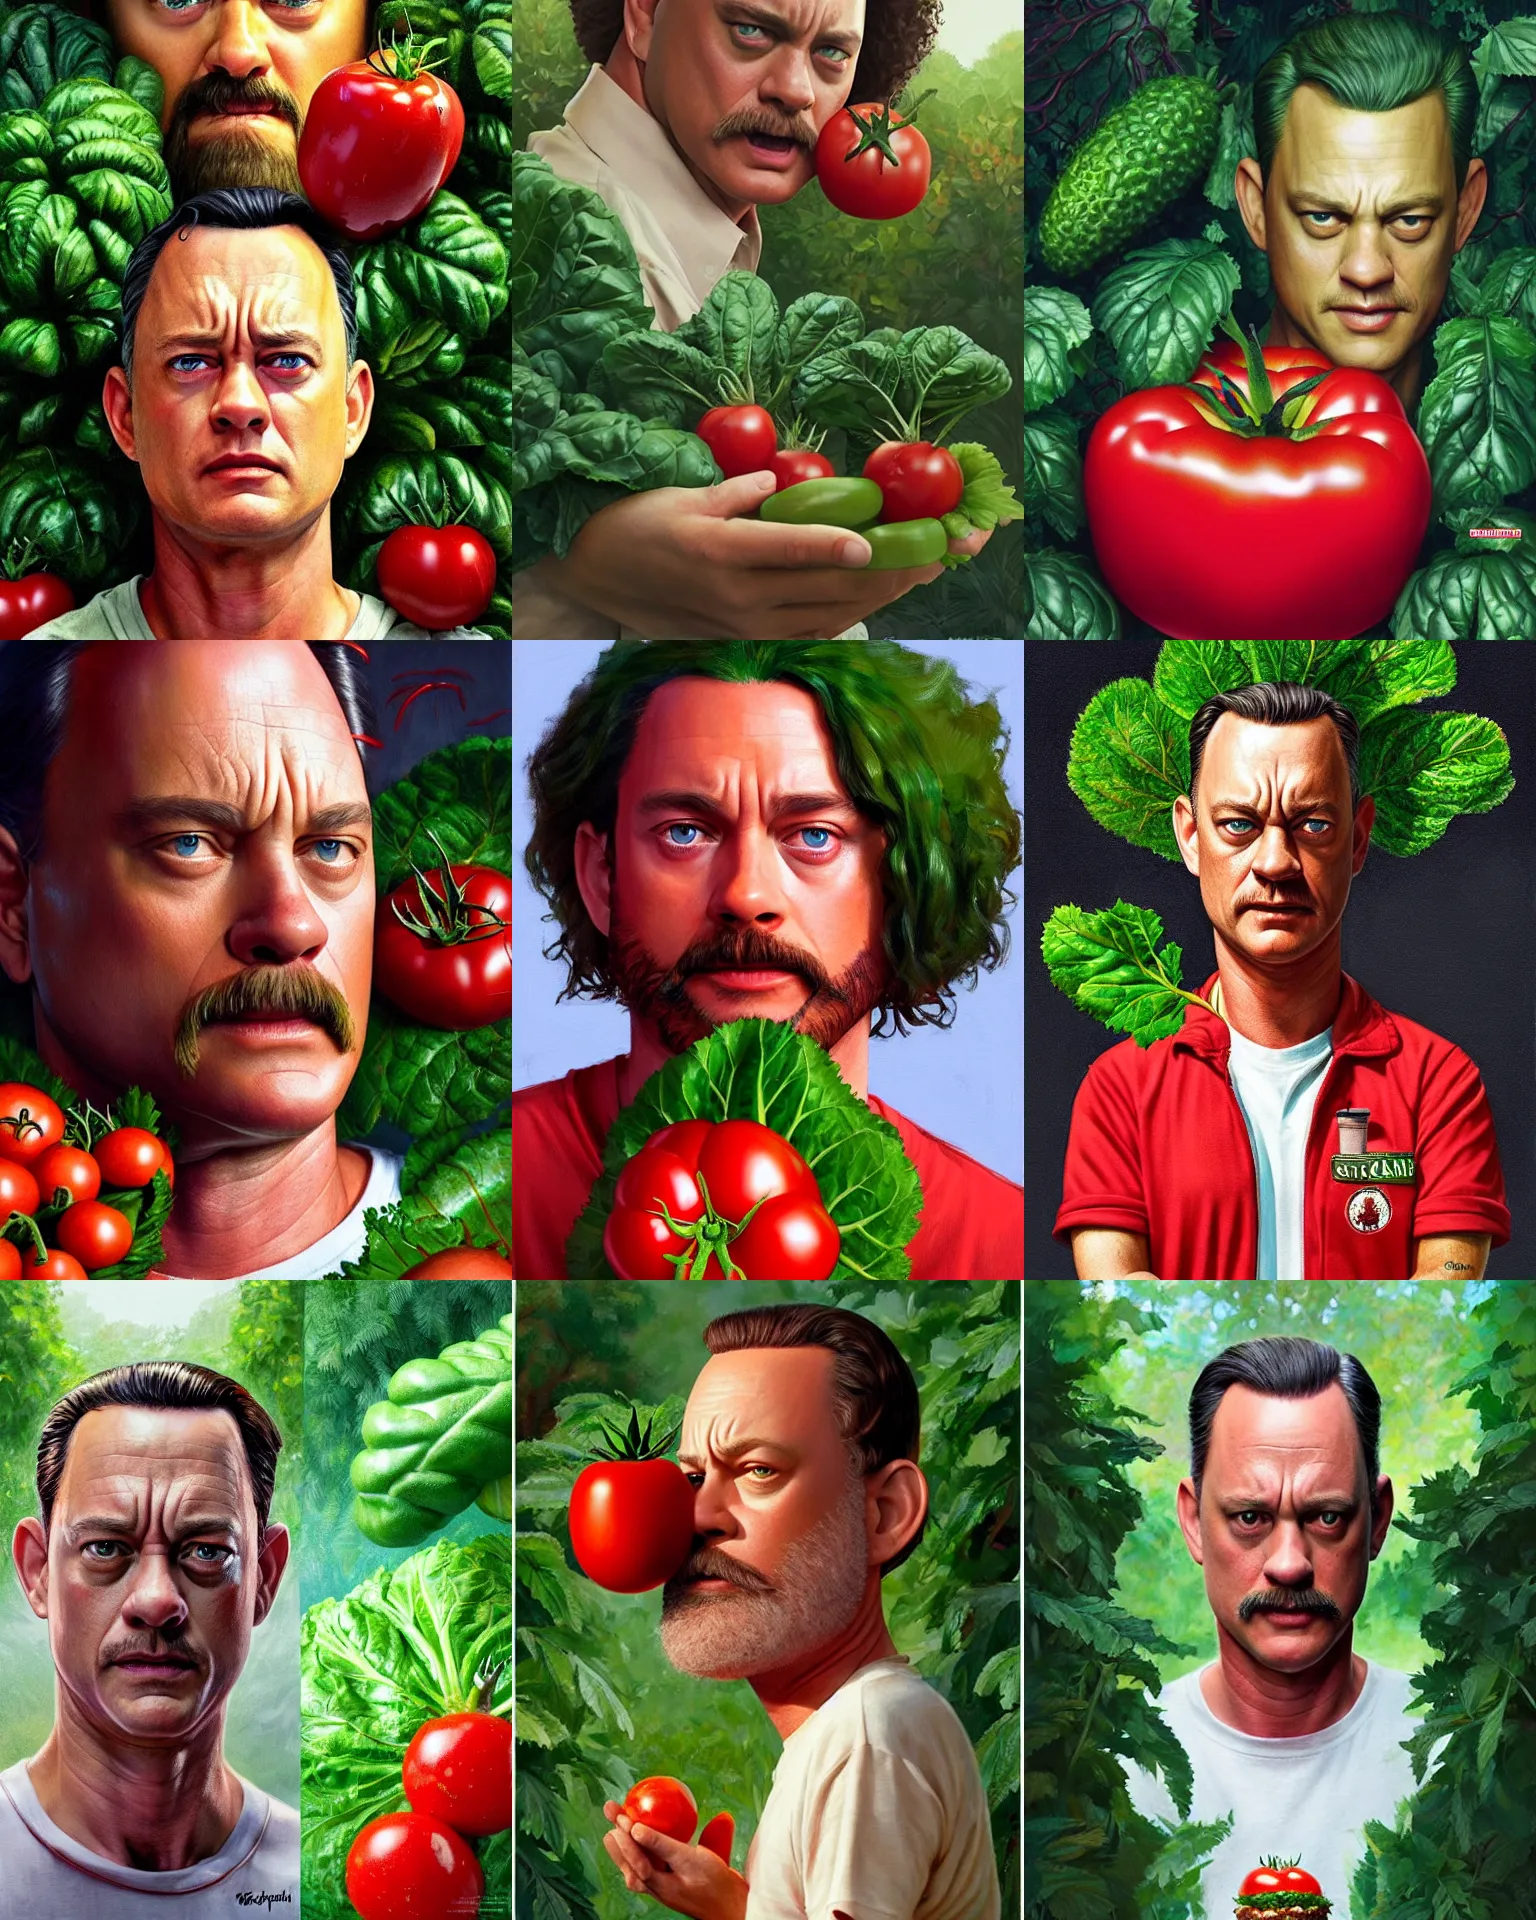 Prompt: forest gump starring tom hank sas a tomato, his skin is red with leafy green hair, pickle rick, dramatic lighting, tom hanks tomato face, shaded lighting poster by magali villeneuve, artgerm, jeremy lipkin and michael garmash, rob rey and kentaro miura style